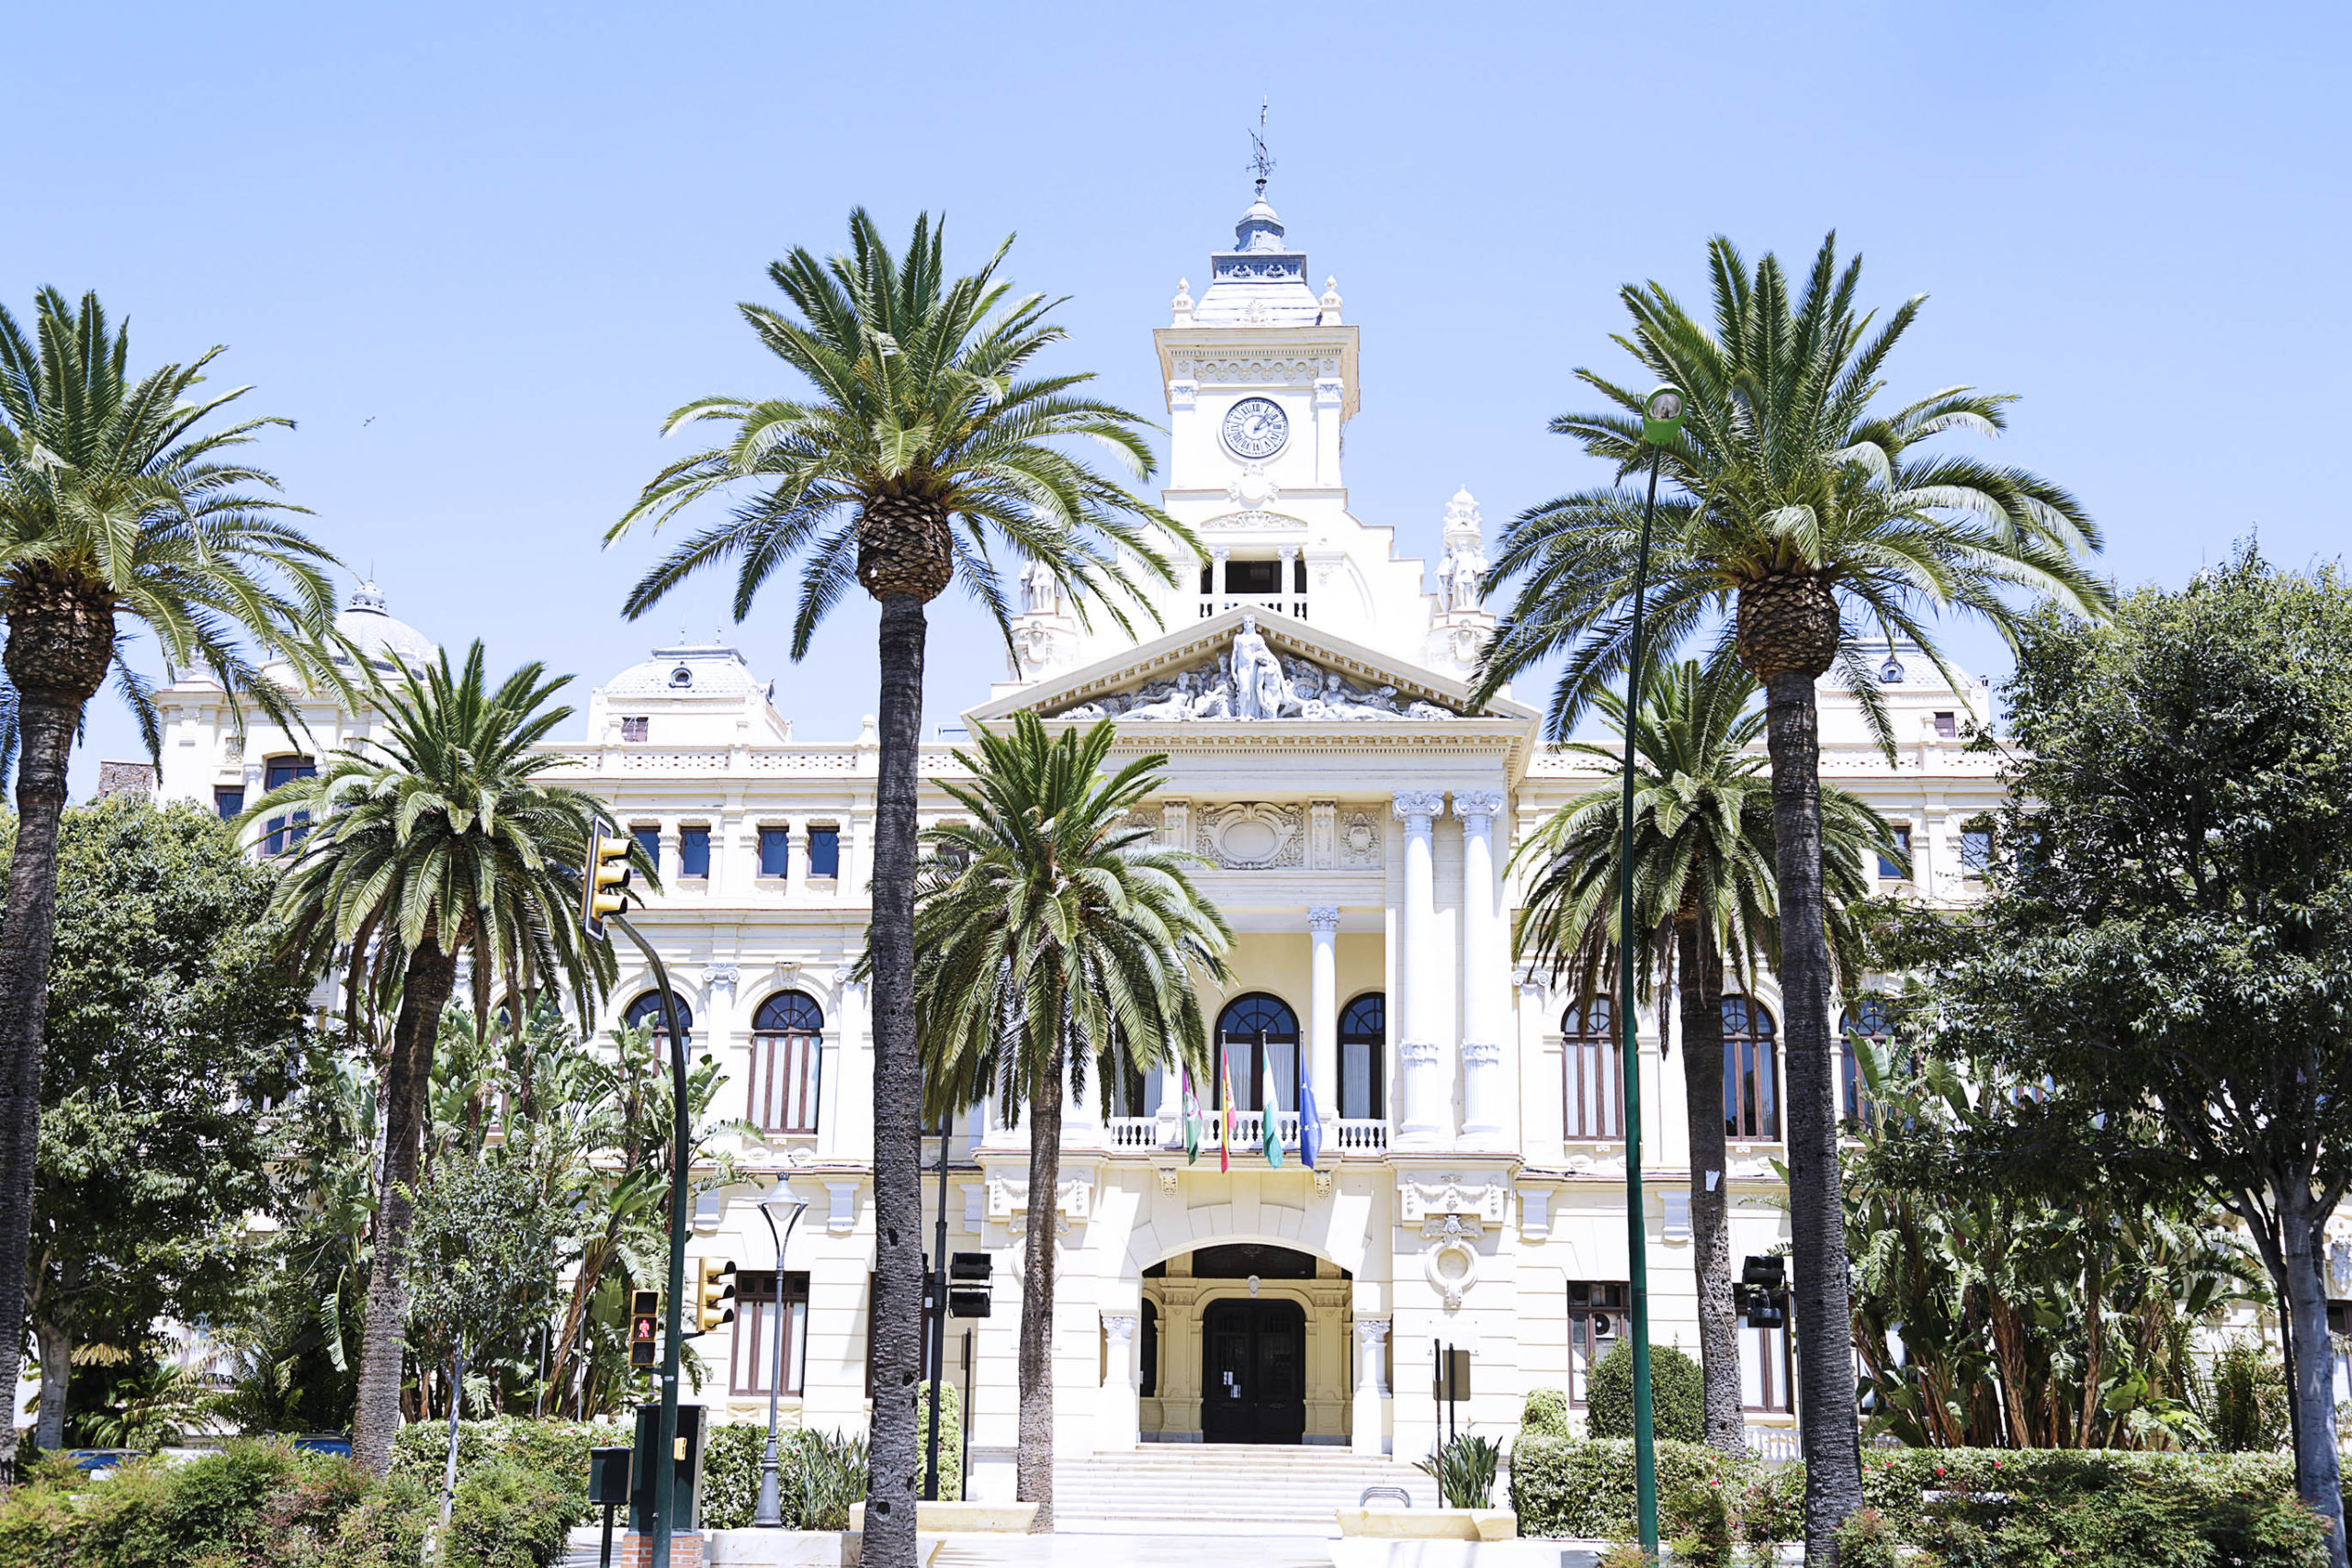 Town hall of Malaga in Andalusia, Spain.